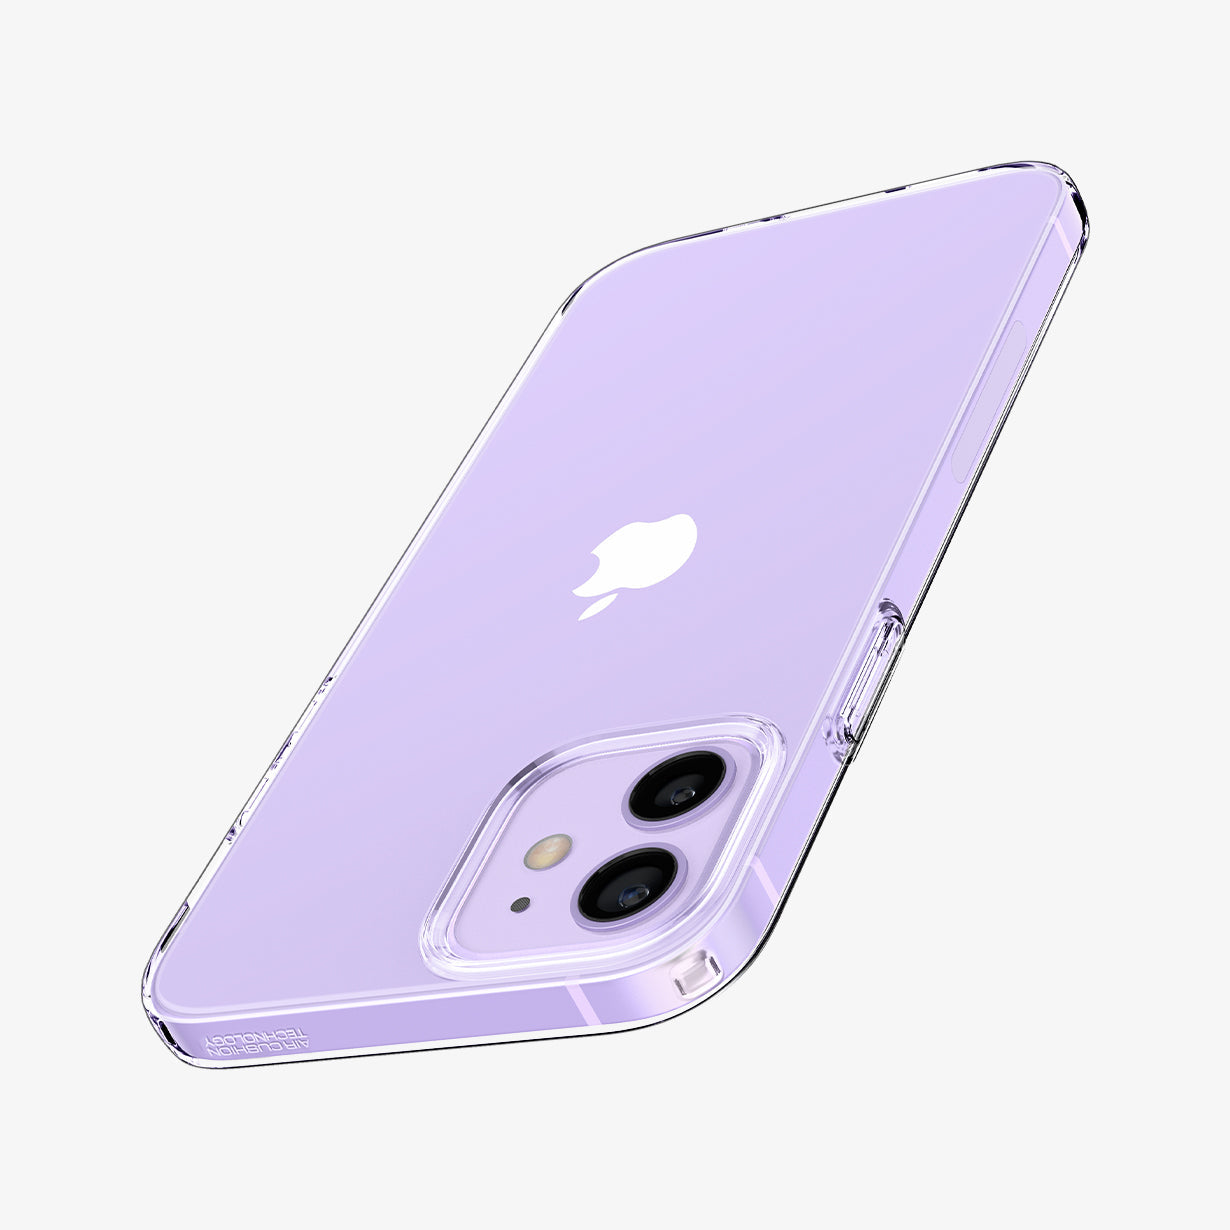 ACS01697 - iPhone 12 / 12 Pro Case Liquid Crystal in crystal clear showing the back, top and side